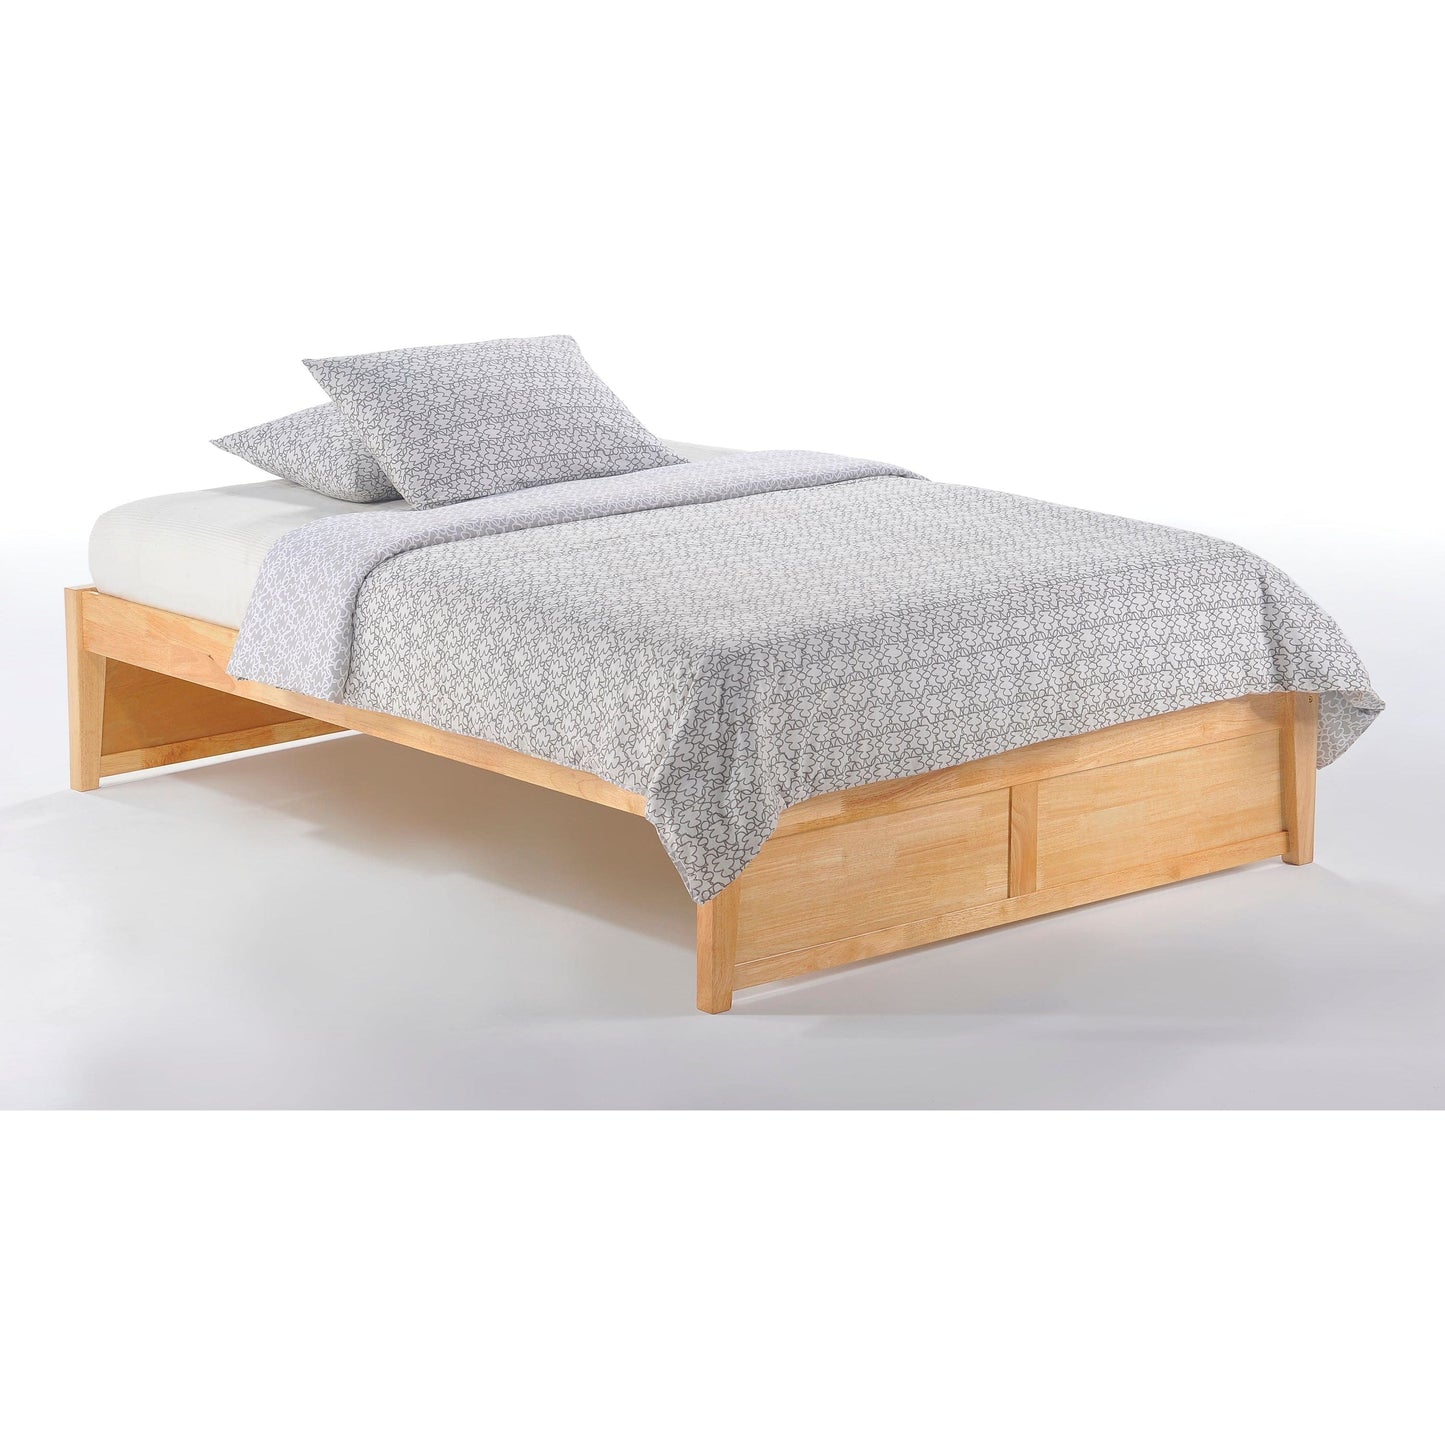 The Bedroom Emporium Twin Basic Platform Bed in cherry finish (K Series) Natural BAS-TWN-COM-K-NA